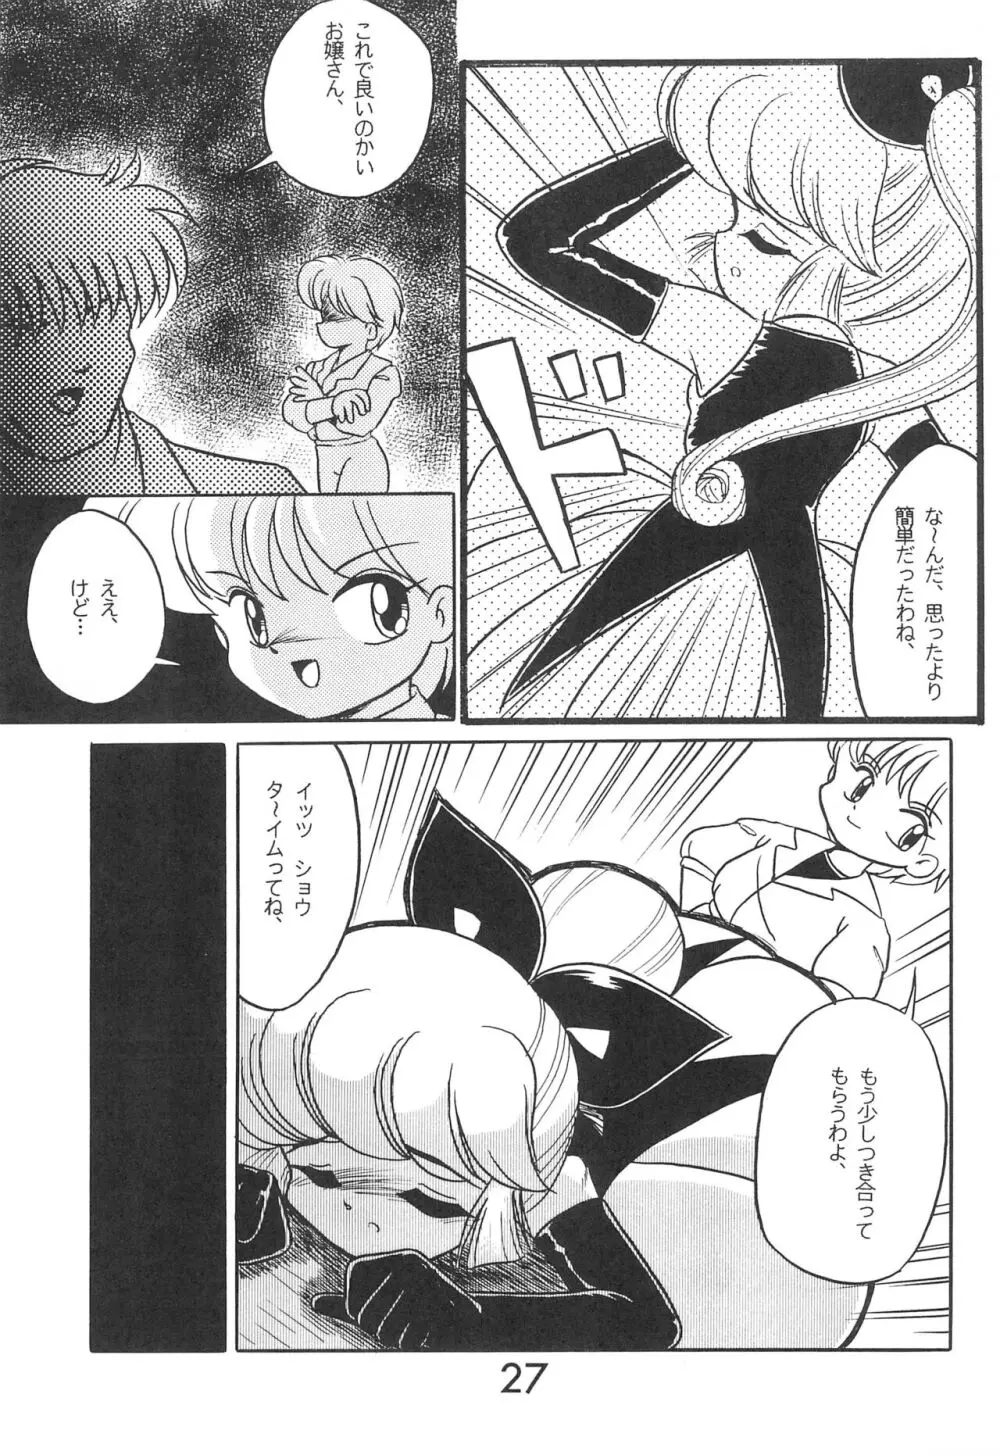 Fun House 9th Chame! - page27